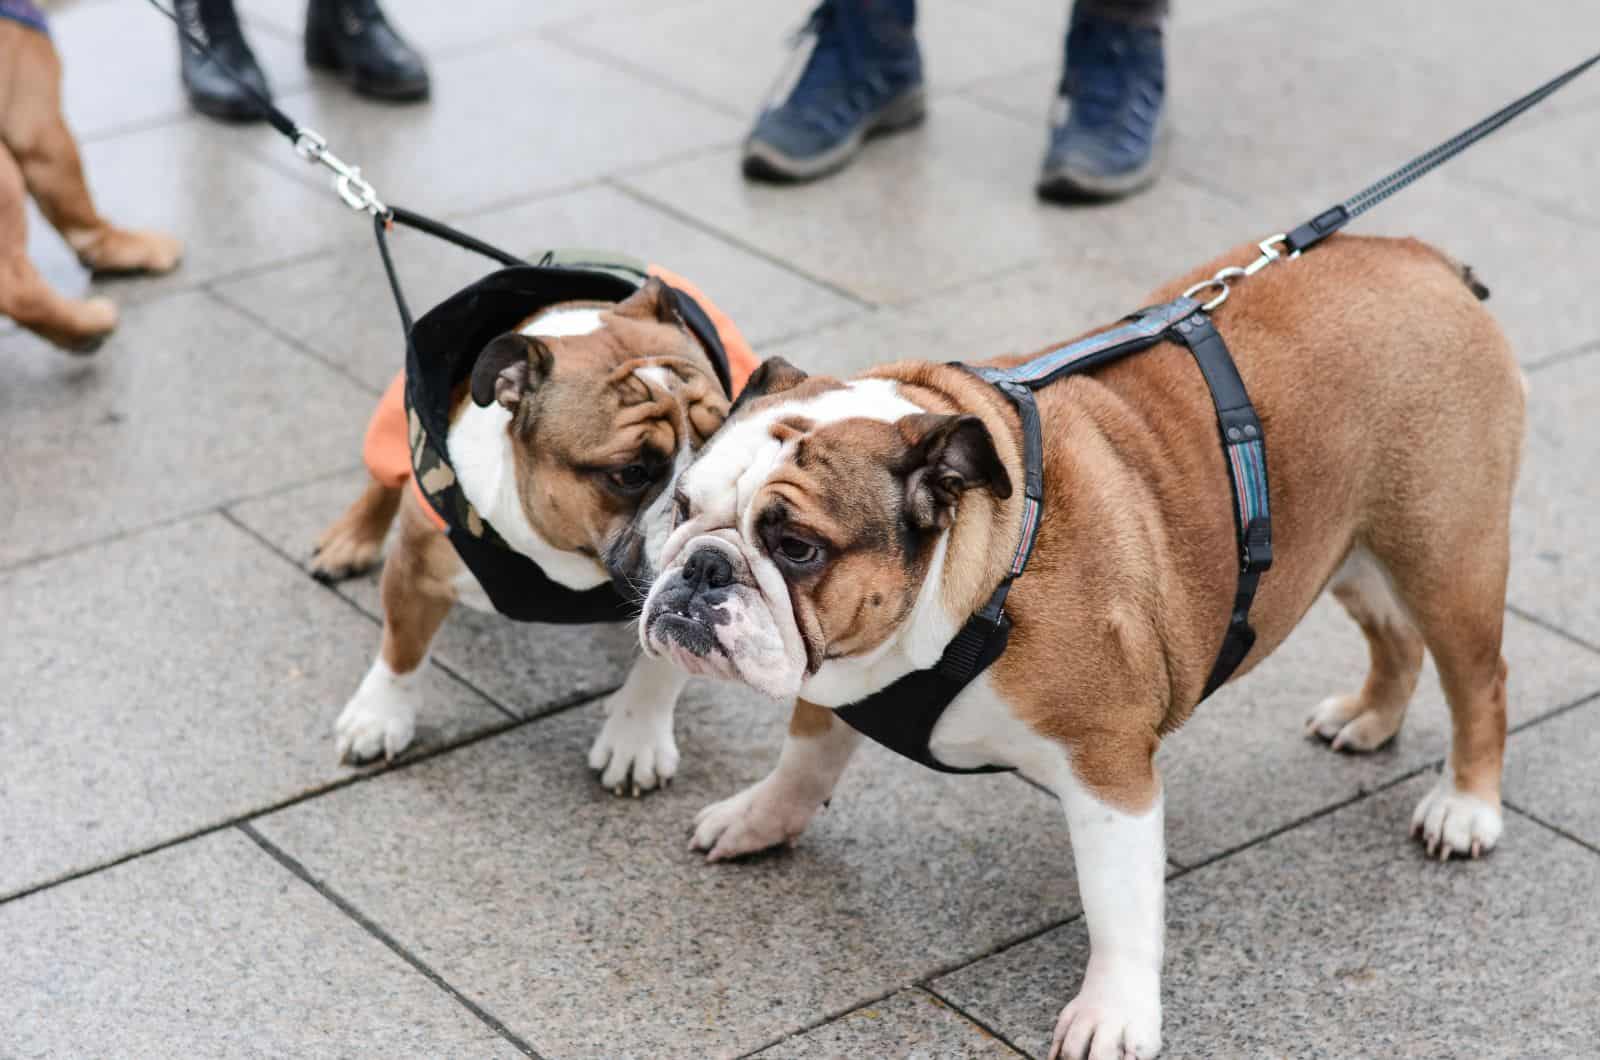 two English Bulldogs with Harnesses